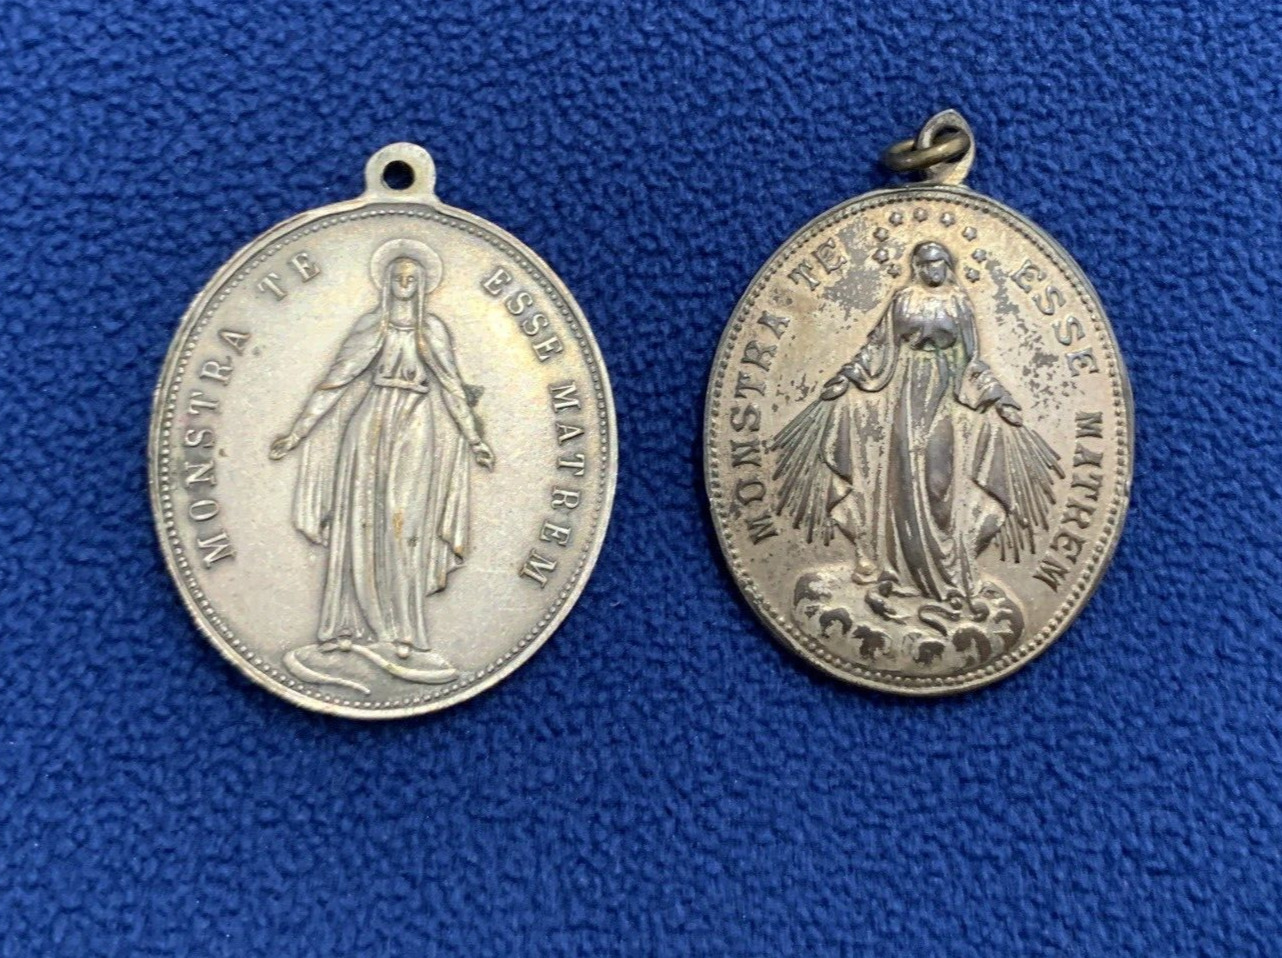 2 x Silver Tone Metal Religious Pendants - Pre-Loved Vintage - Size 3 cm Approx